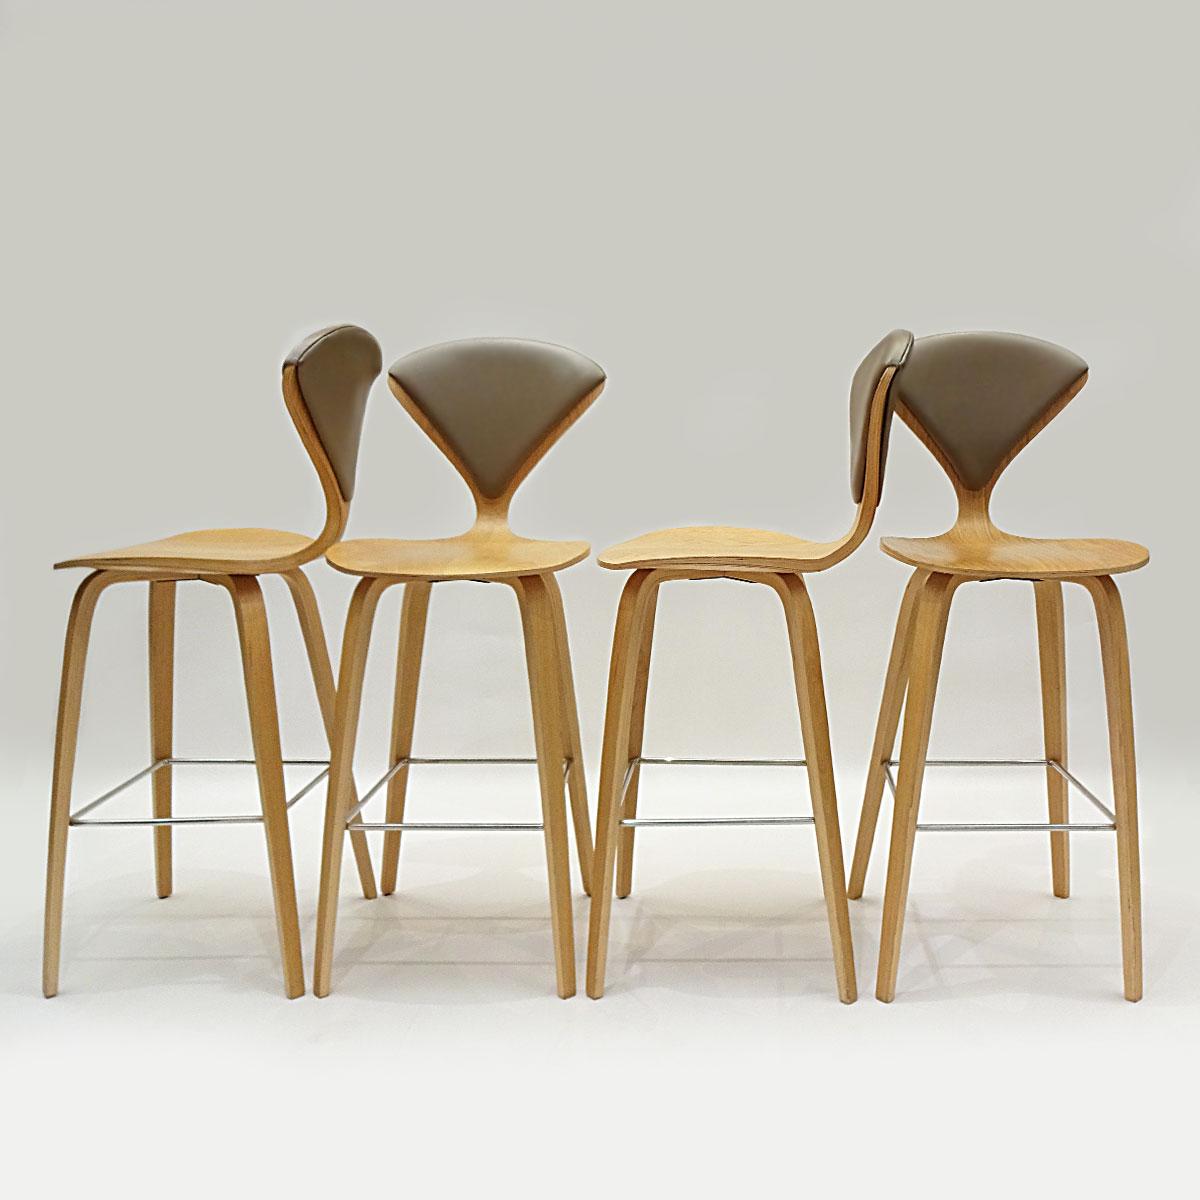 A set of Norman Cherner designed bar stools in oak veneered plywood with chrome bases and vinyl back pads.

Originally designed in 1958 these Norman Cherner bar stools echo many of the features that Cherner was famous for. These include the